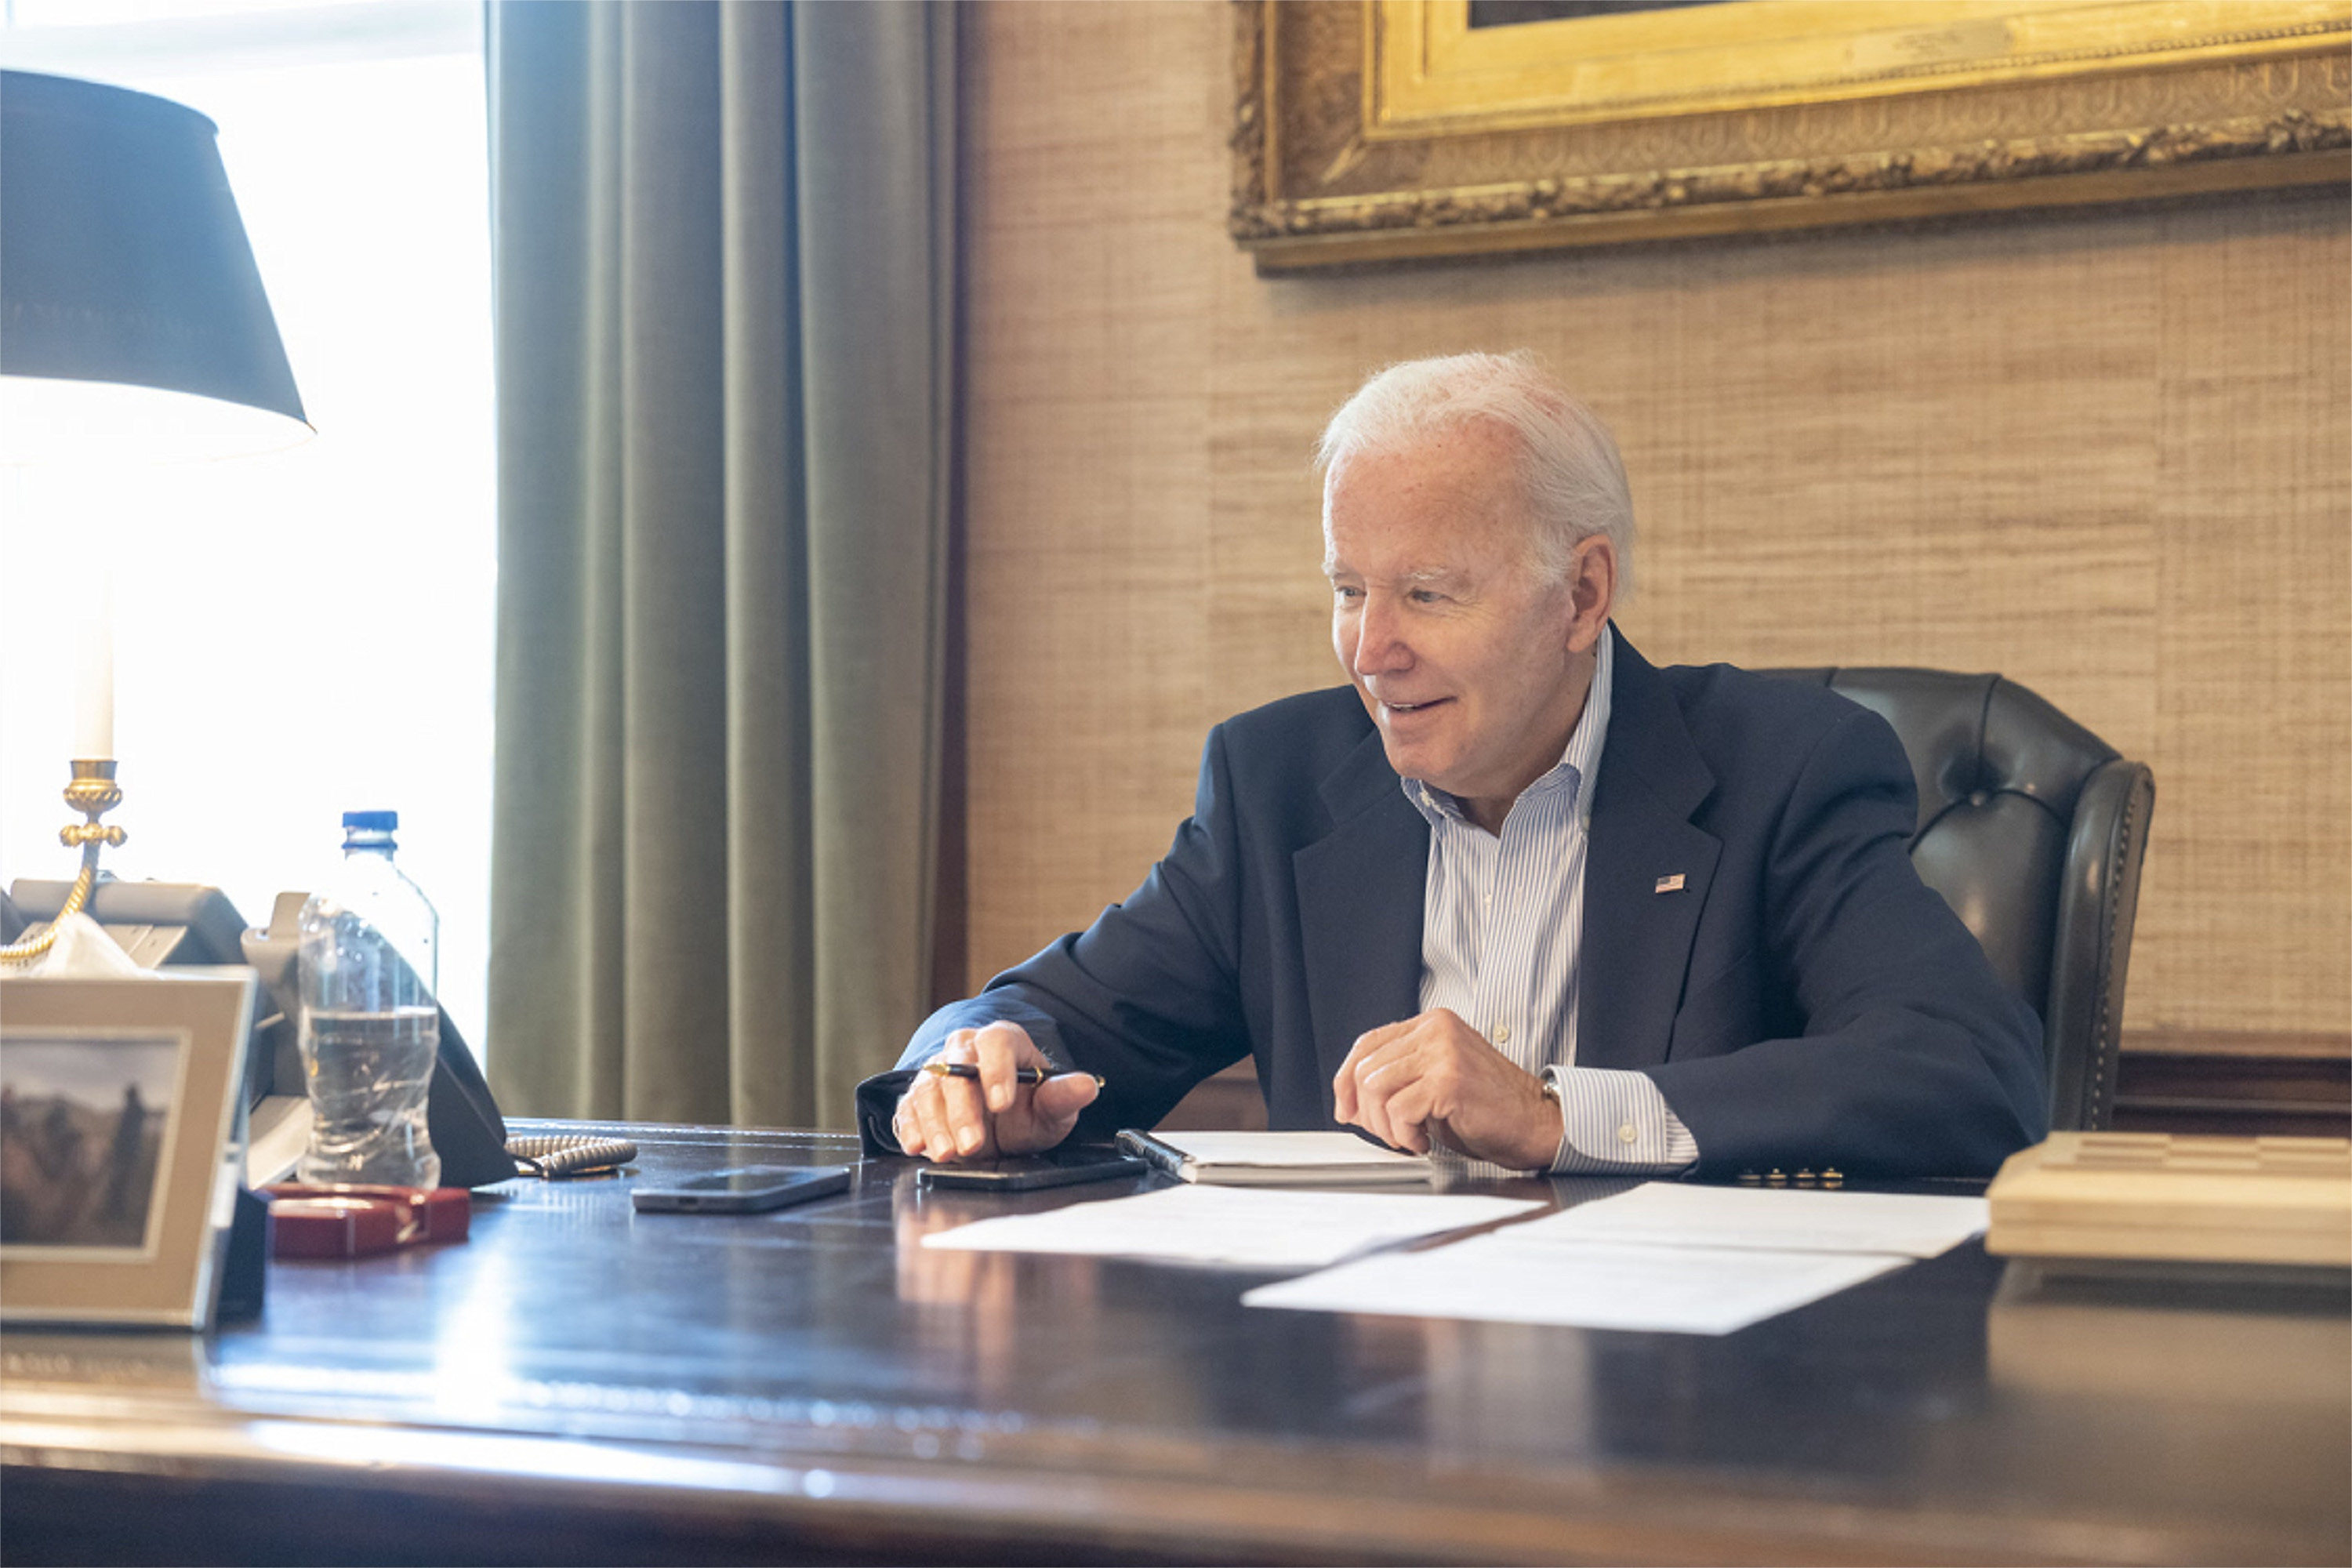 US President Joe Biden shown speaking by telephone on Thursday with Pennsylvania lawmakers after a positive Covid-19 test forced the cancellation of his scheduled trip to Wilkes-Barre. White House/Planet Pix/Zuma Press via TNS